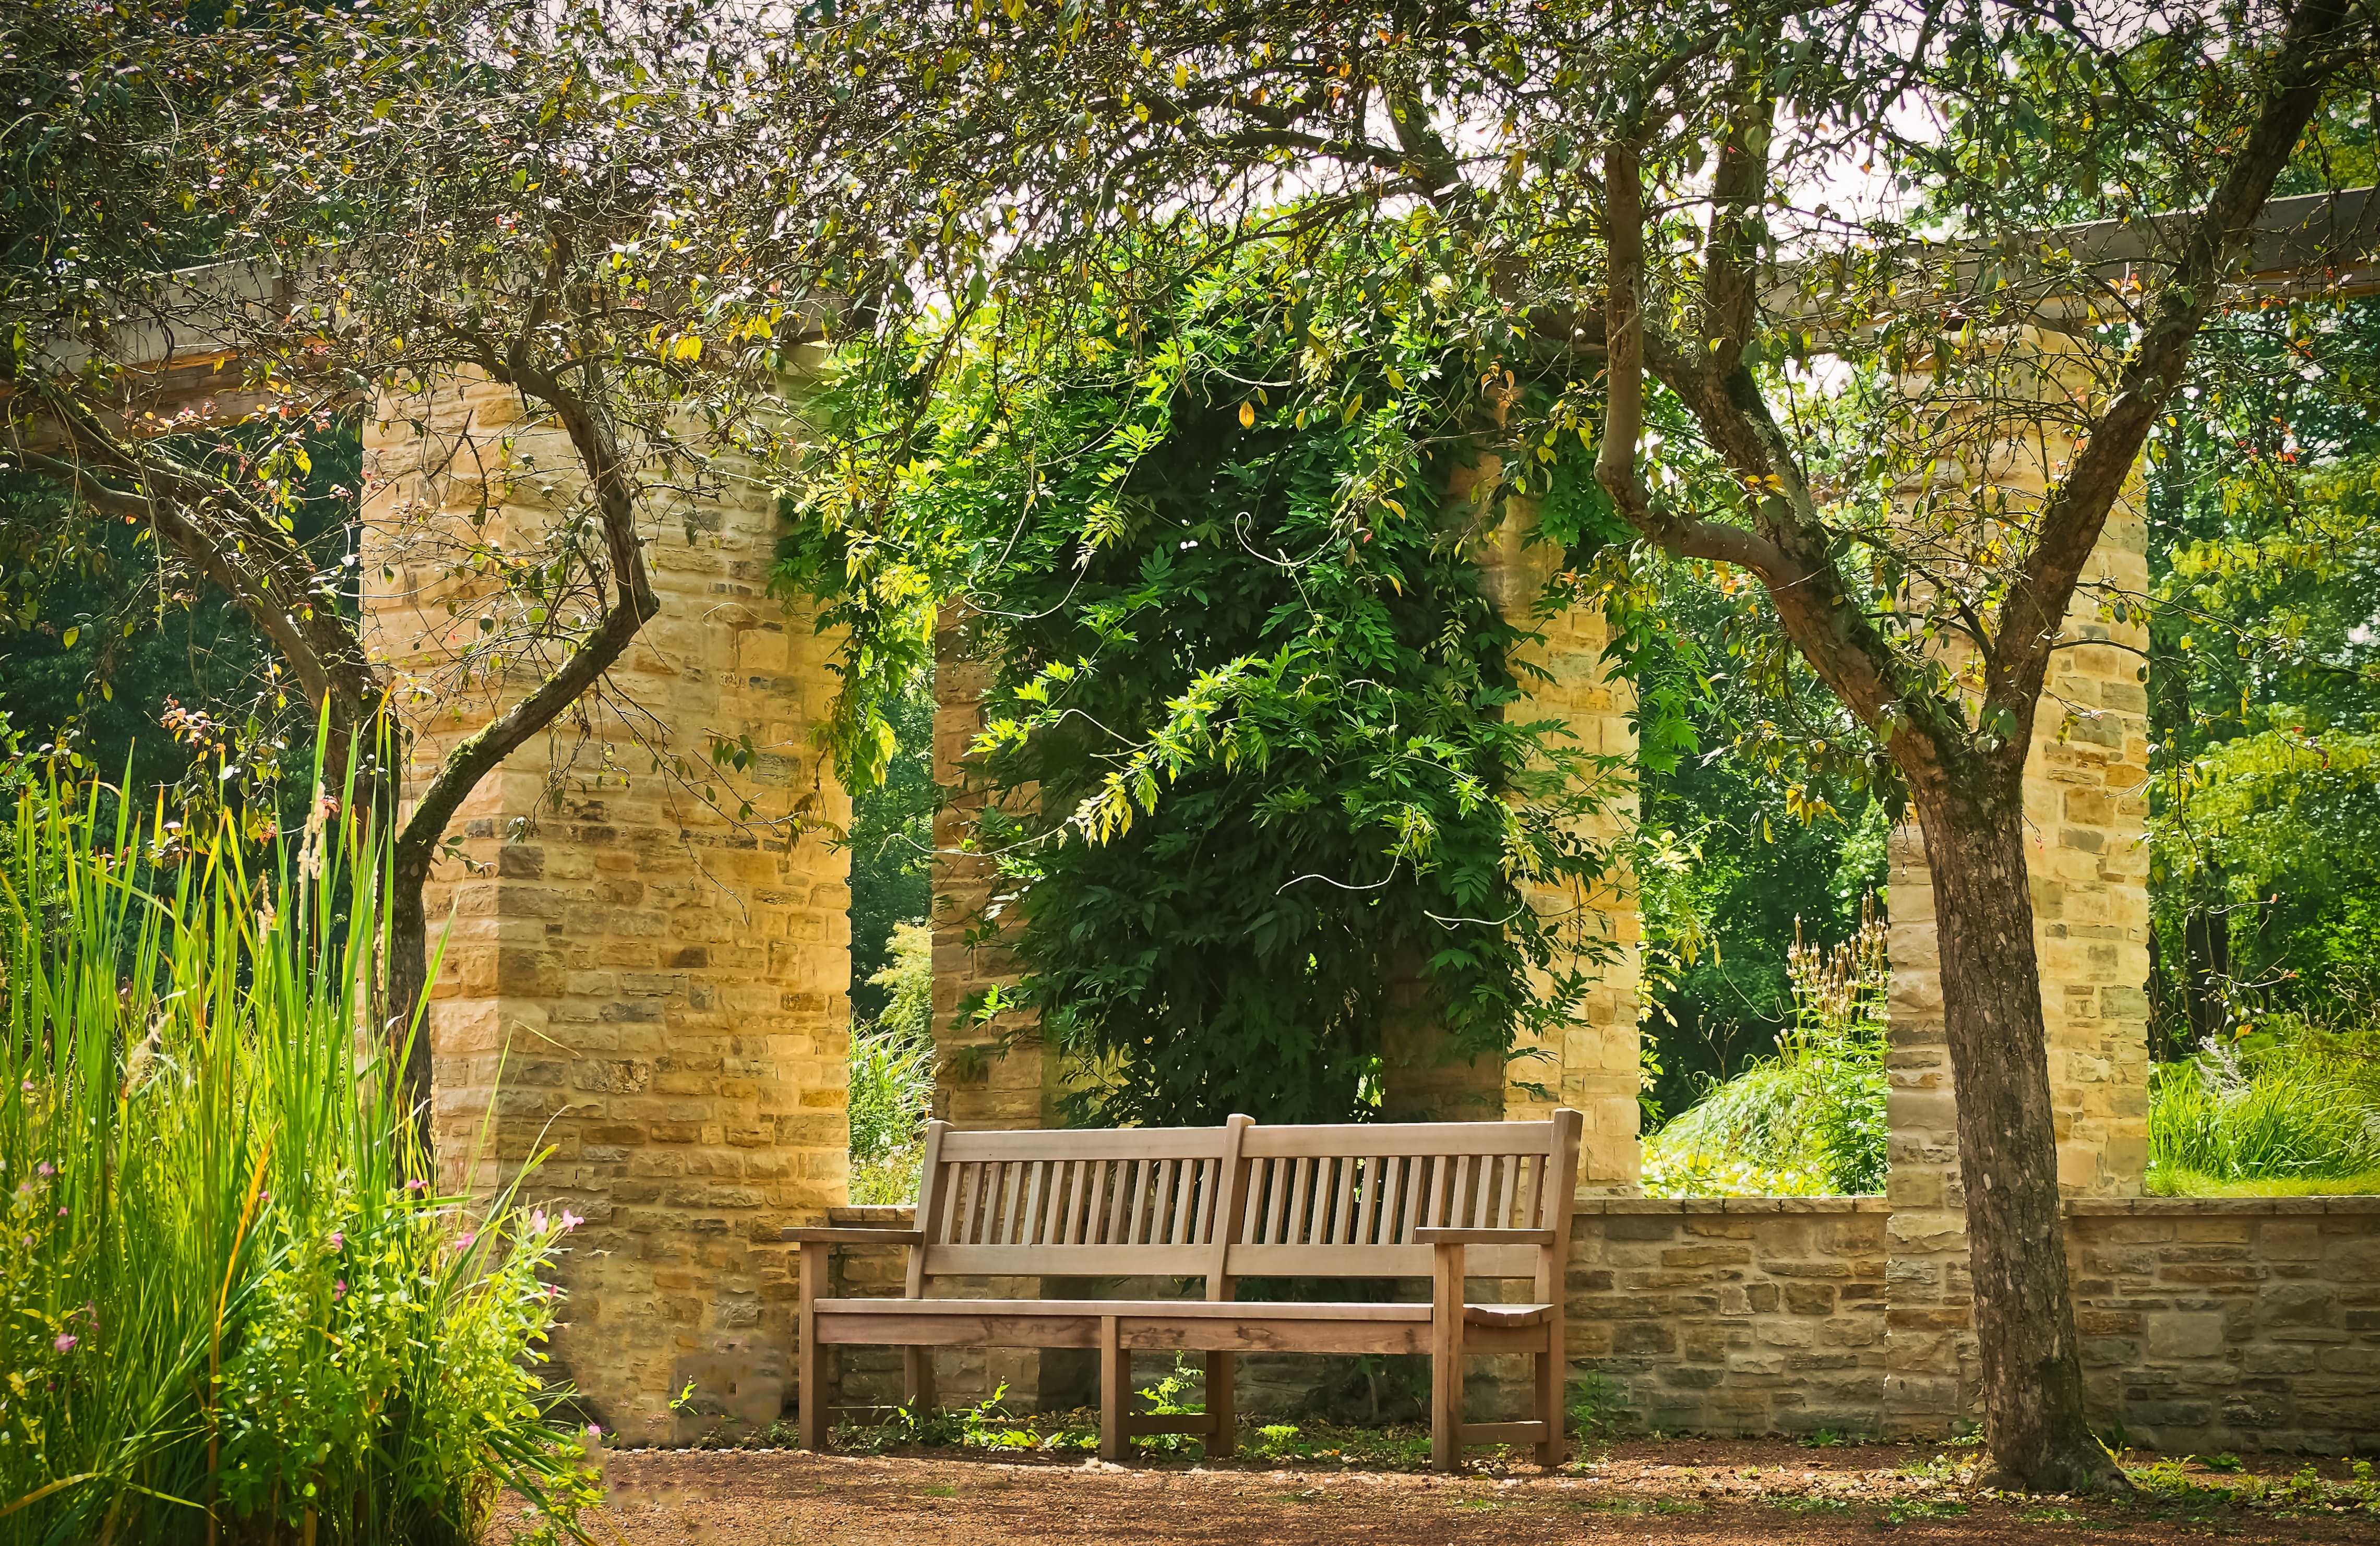 Bench Between the Two Trees, Architecture, Plants, Trees, Sun, HQ Photo